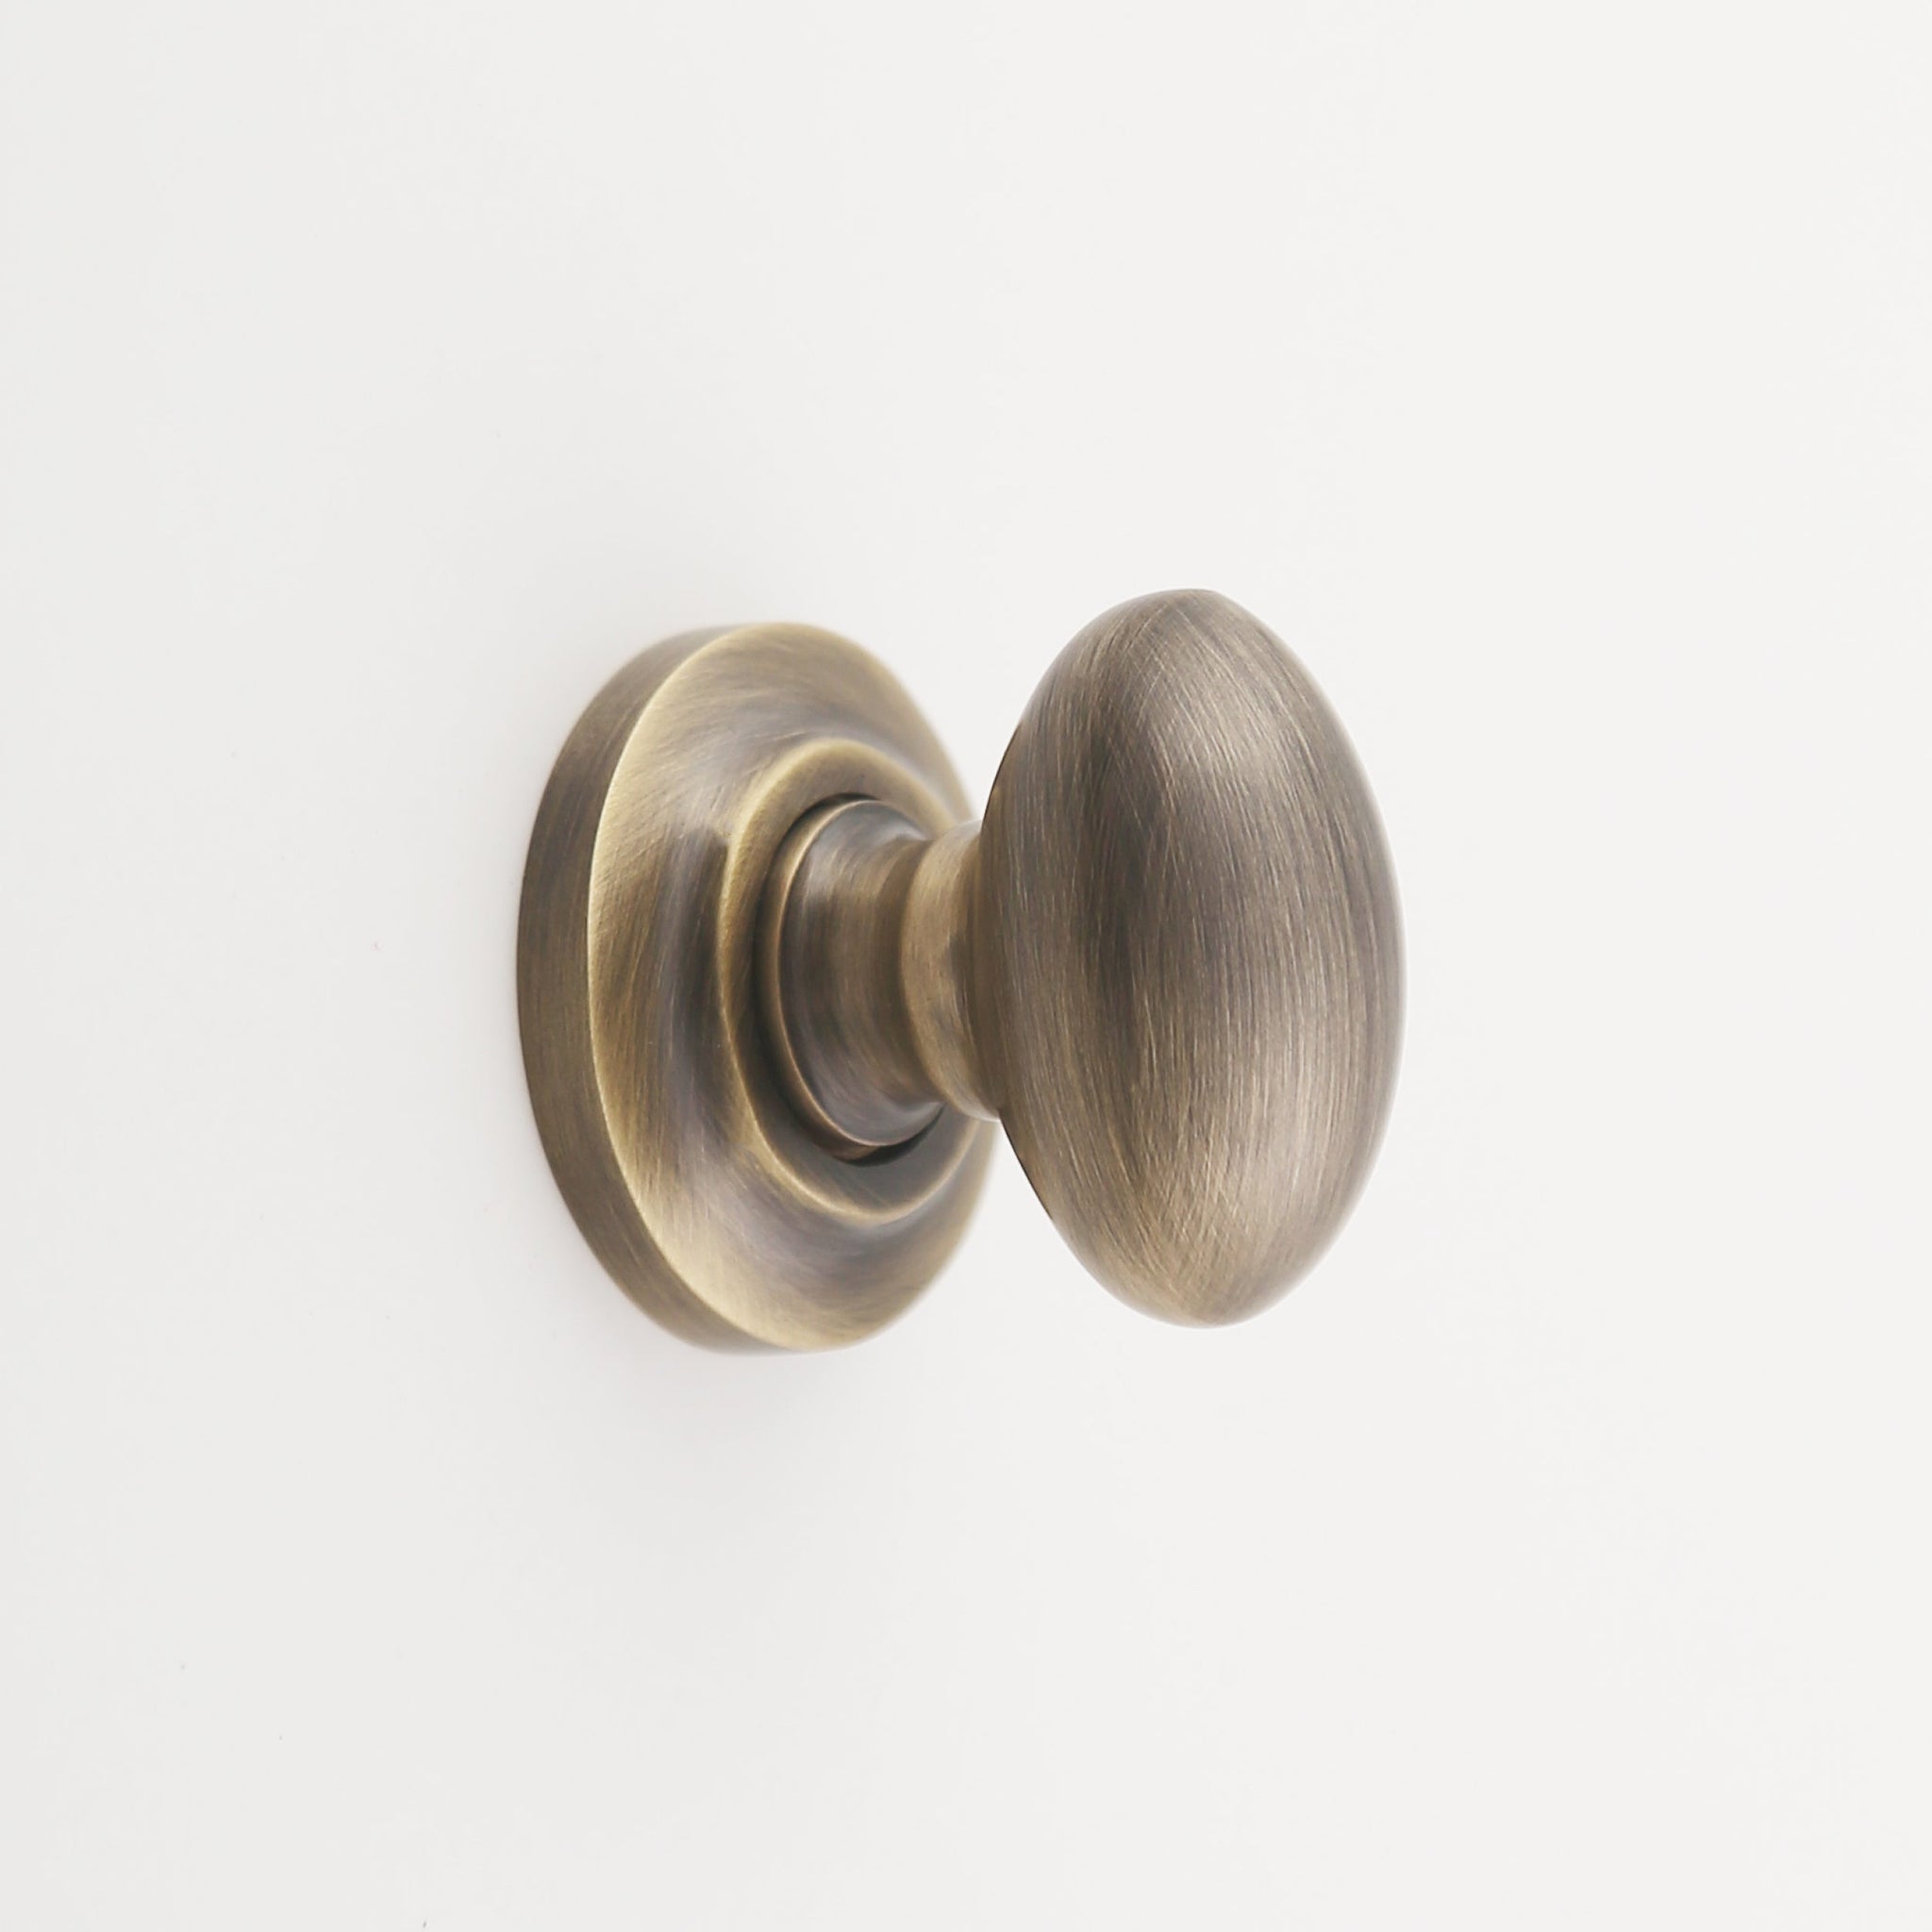 Solid Brass Cabinet Hardware - Pulls and Knobs – Madelyn Carter